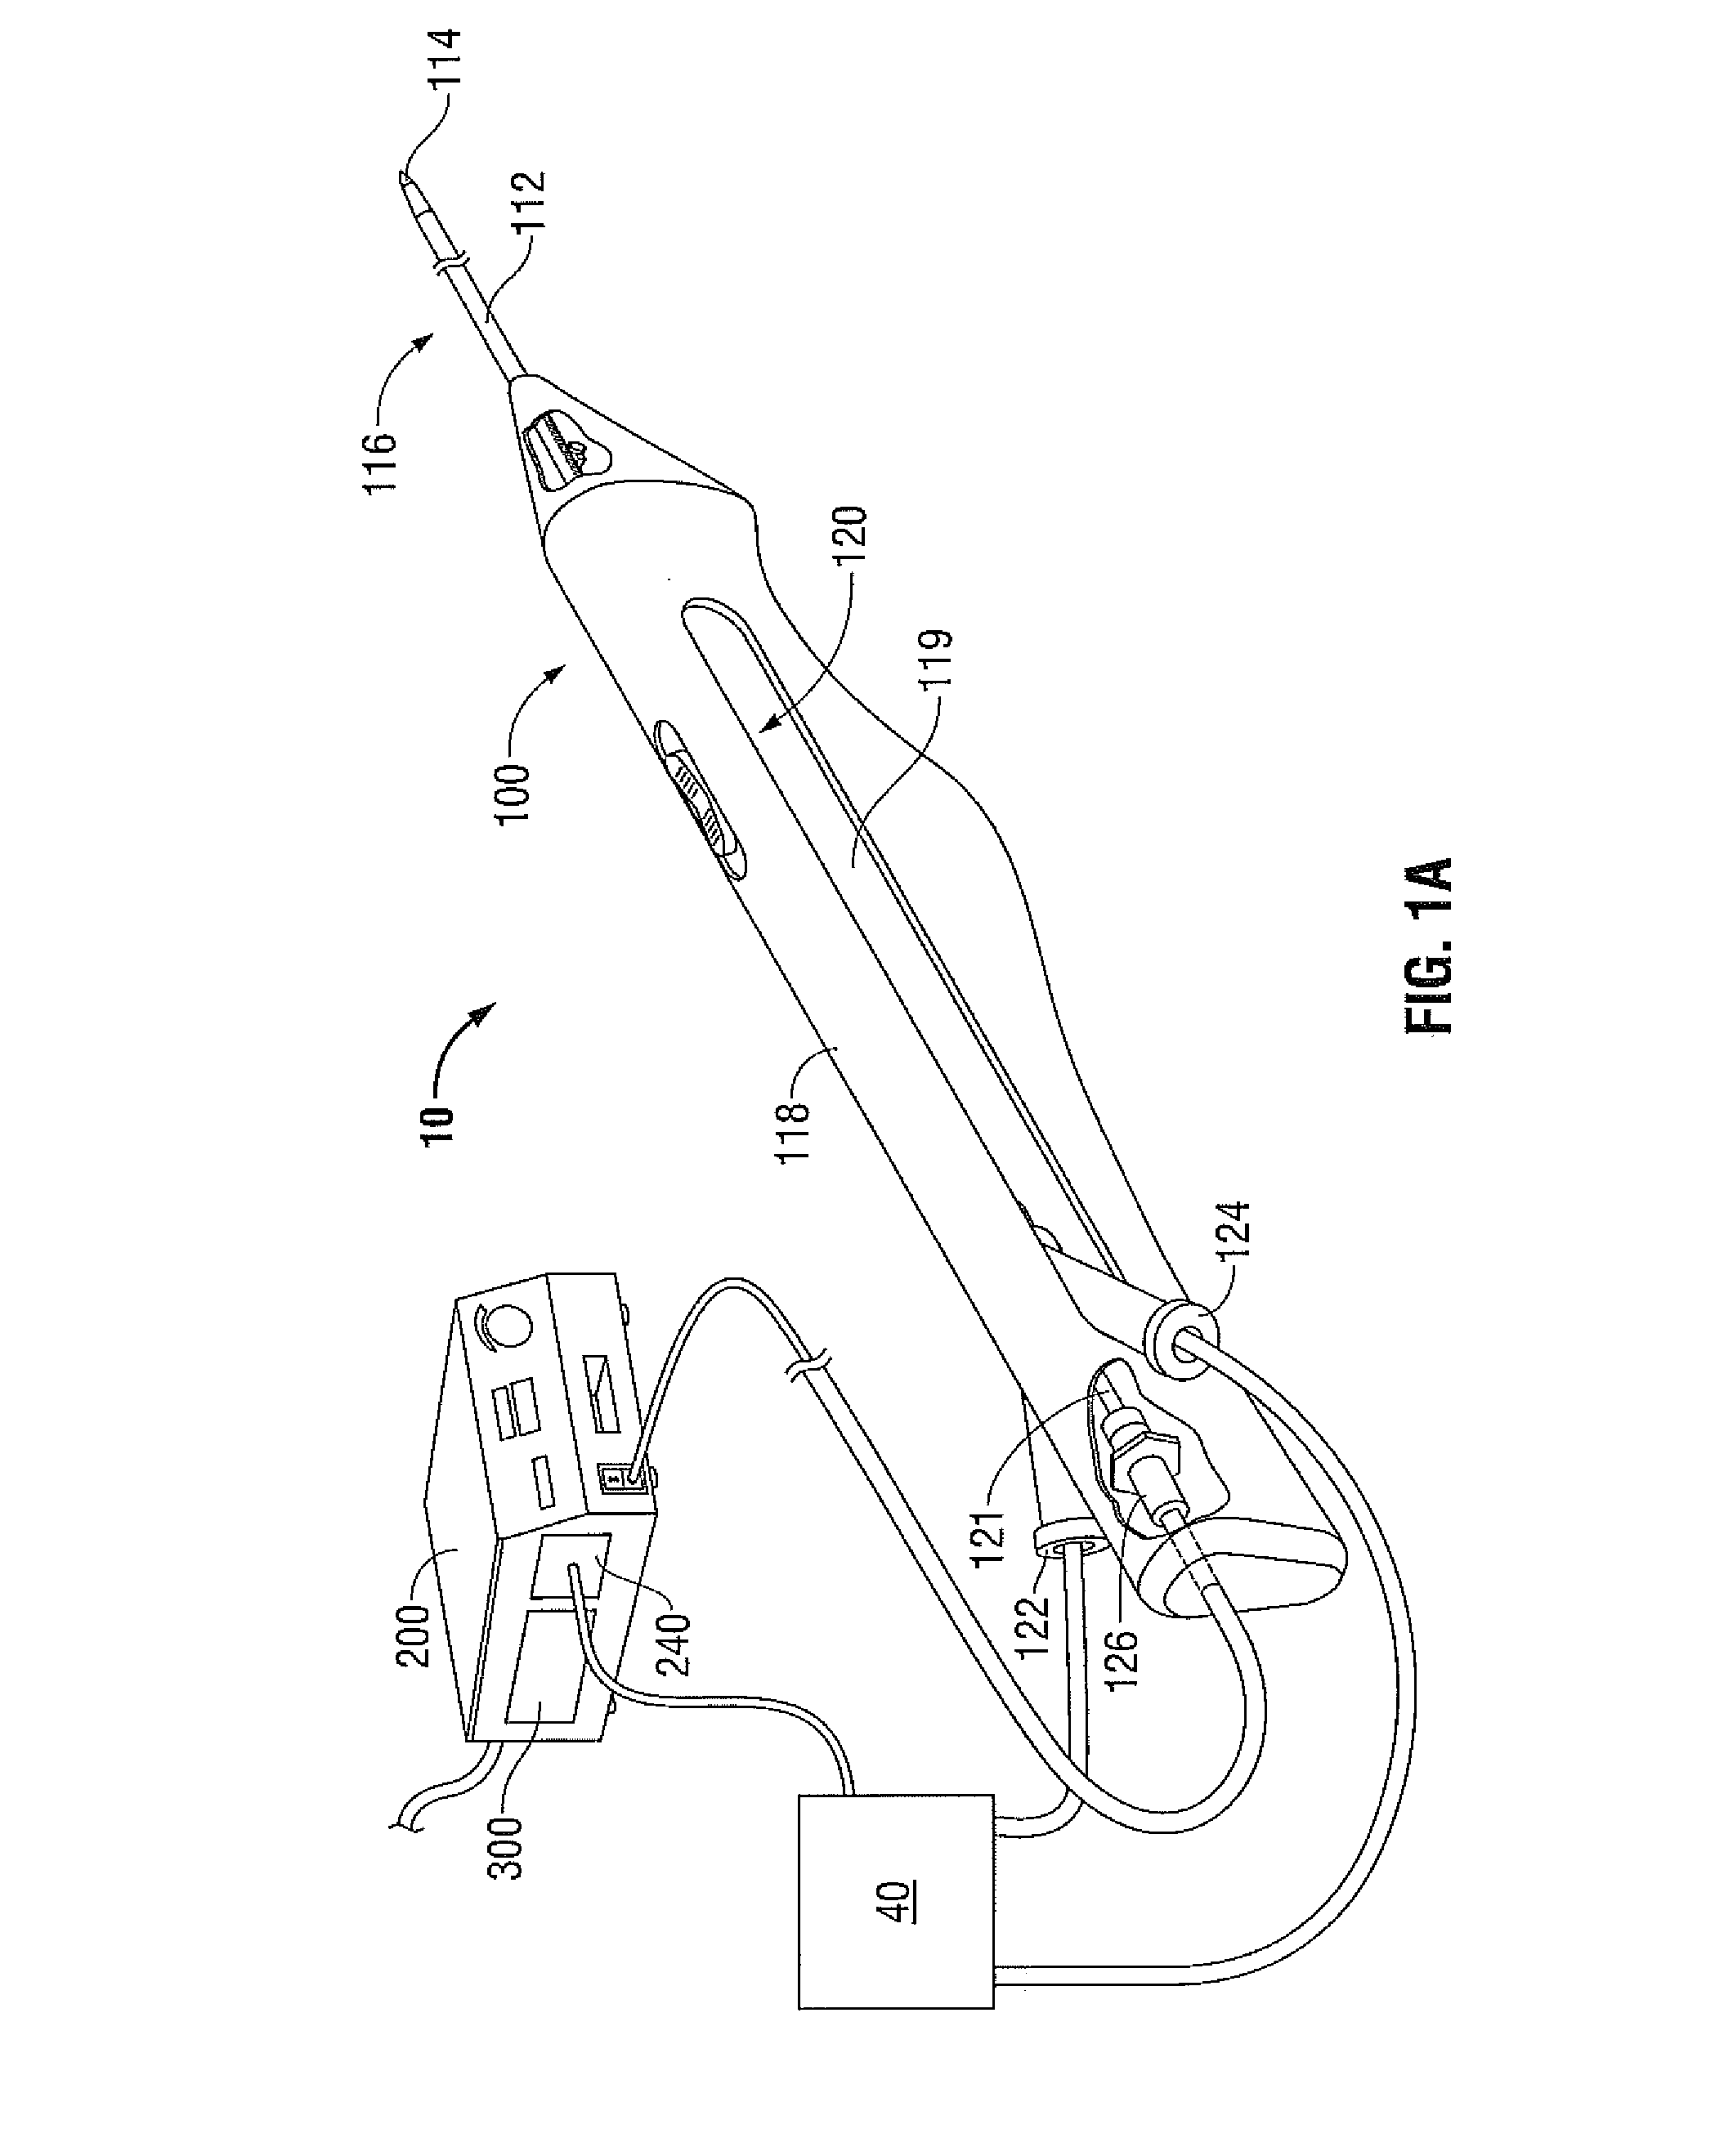 System and Method for Monitoring Ablation Size